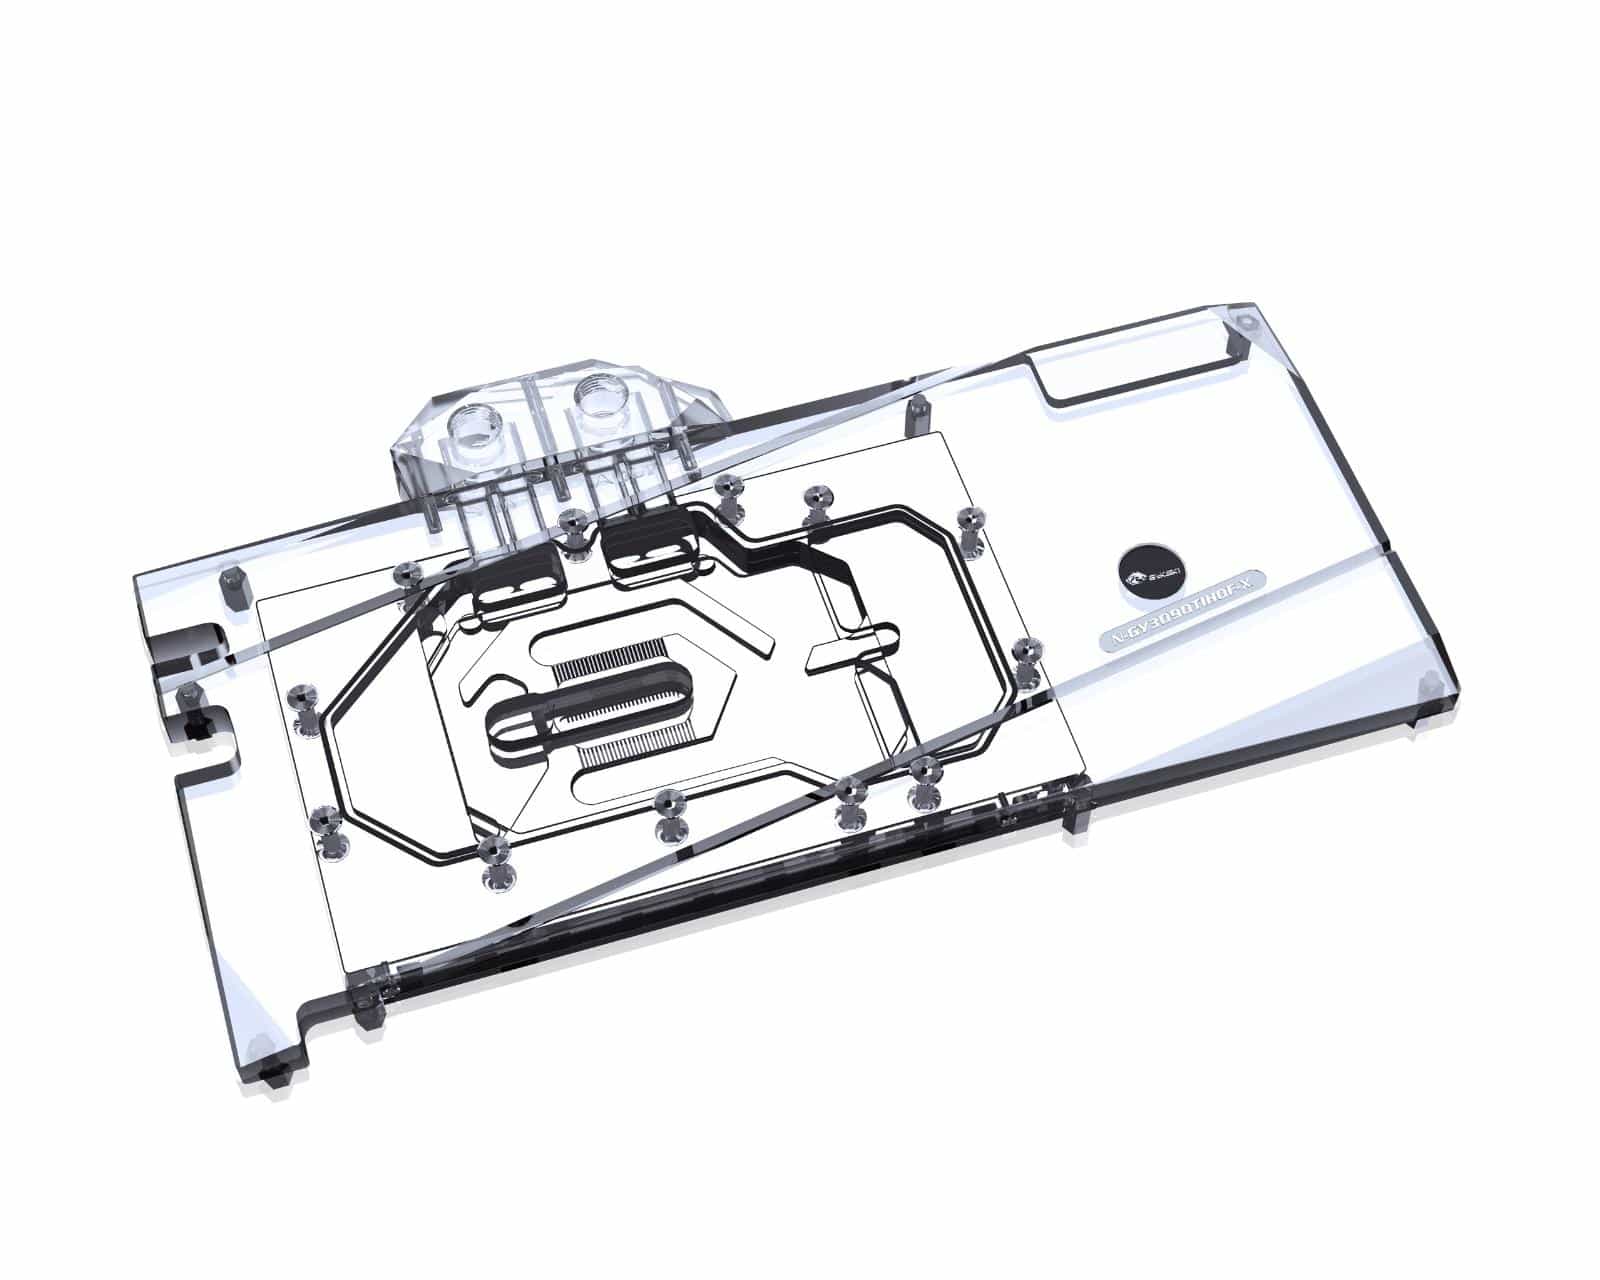 Bykski Full Coverage GPU Water Block and Backplate for GALAXY RTX 3090Ti HOF OC Lab Edition (N-GY3090TIHOF-X) - PrimoChill - KEEPING IT COOL